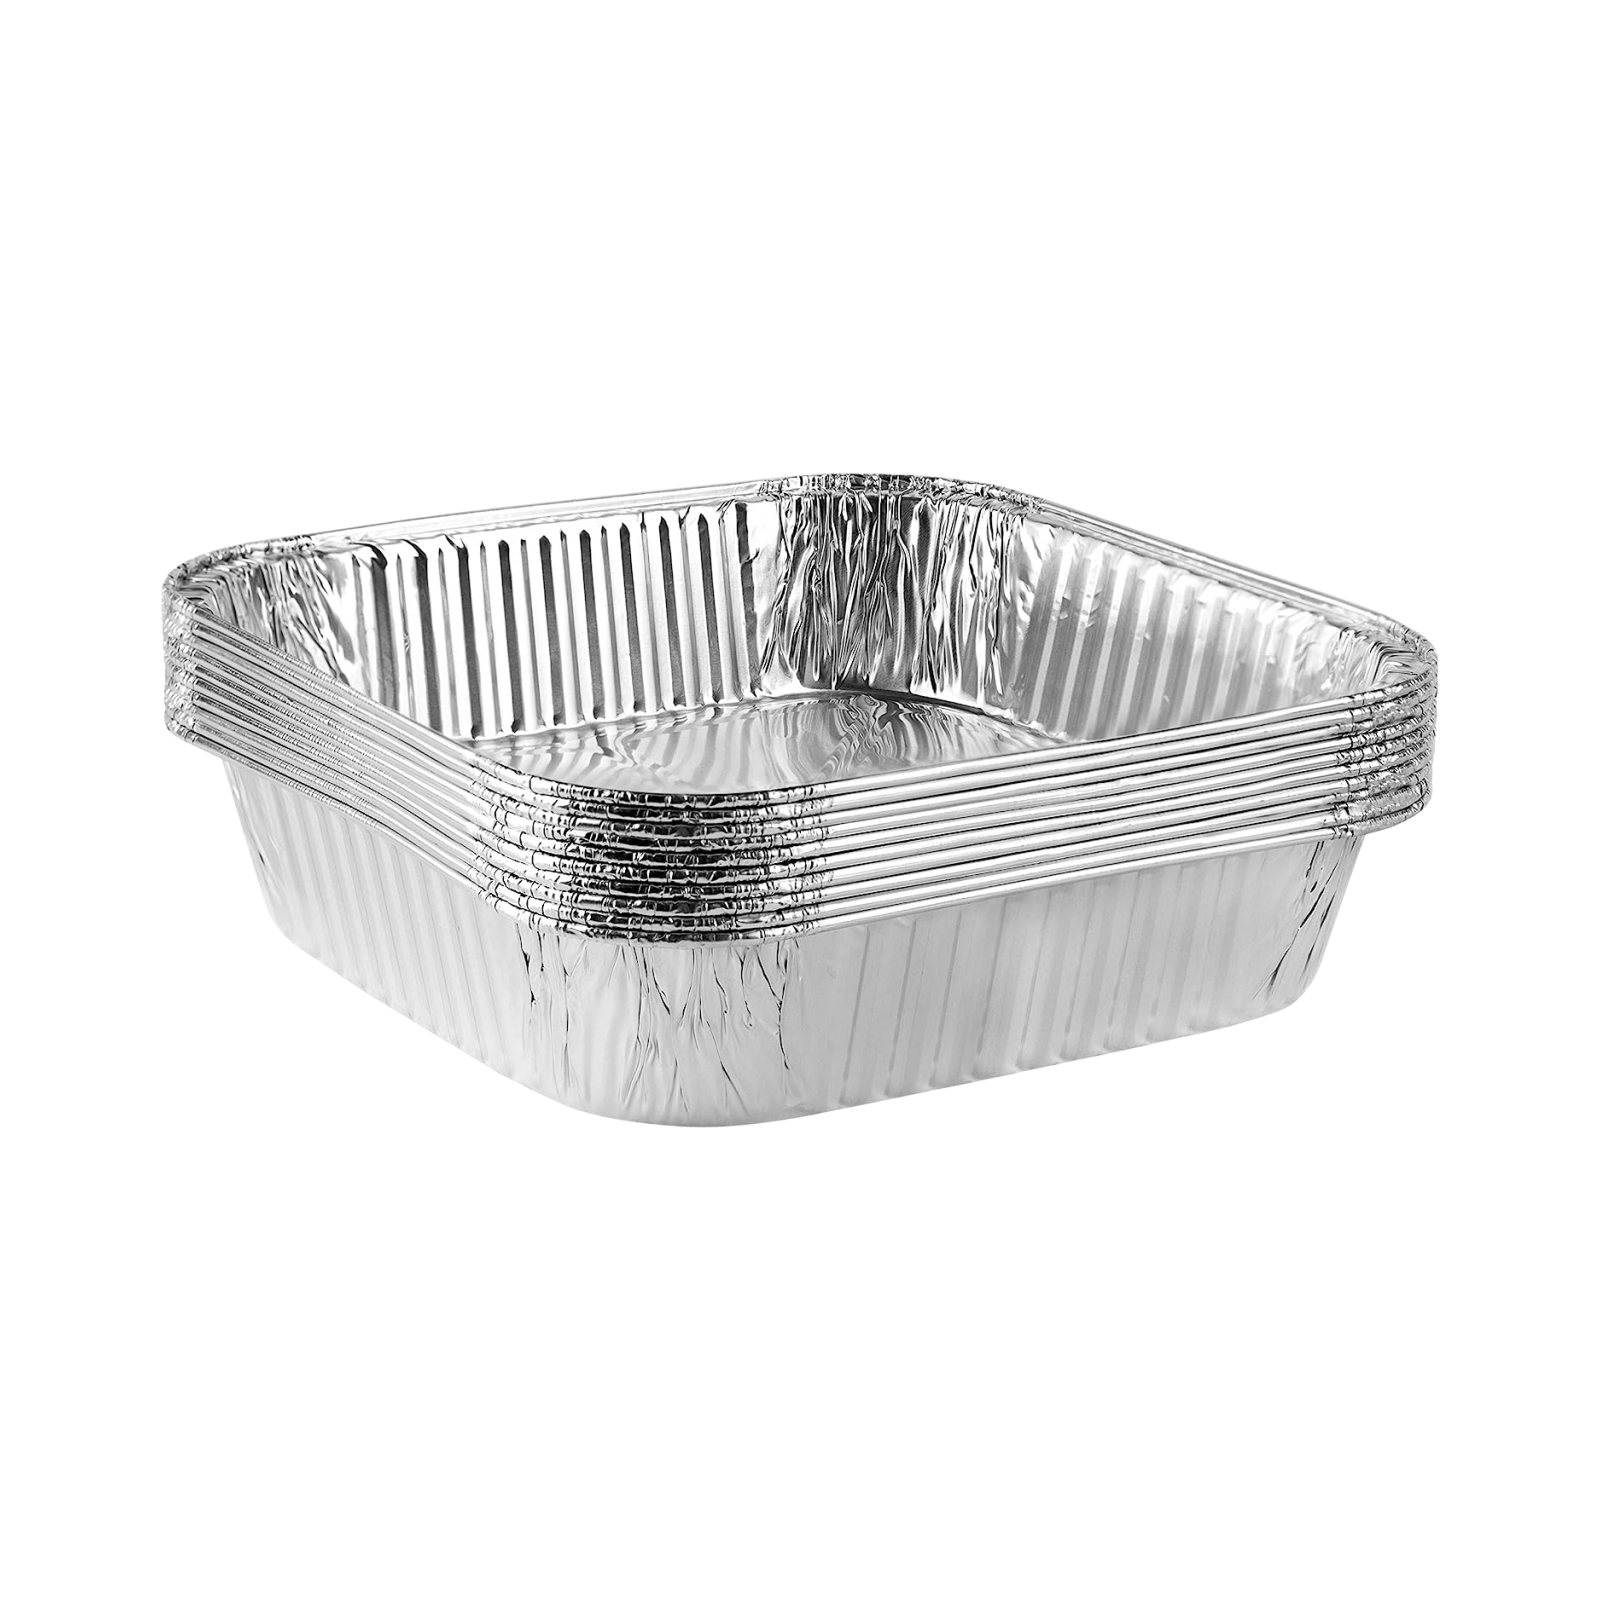 8x8 Disposable Aluminum Pans With Lids - 10 Pack Foil Pans For Cooking,  Baking Cakes, Roasting & Homemade Breads - Disposable Food Containers With